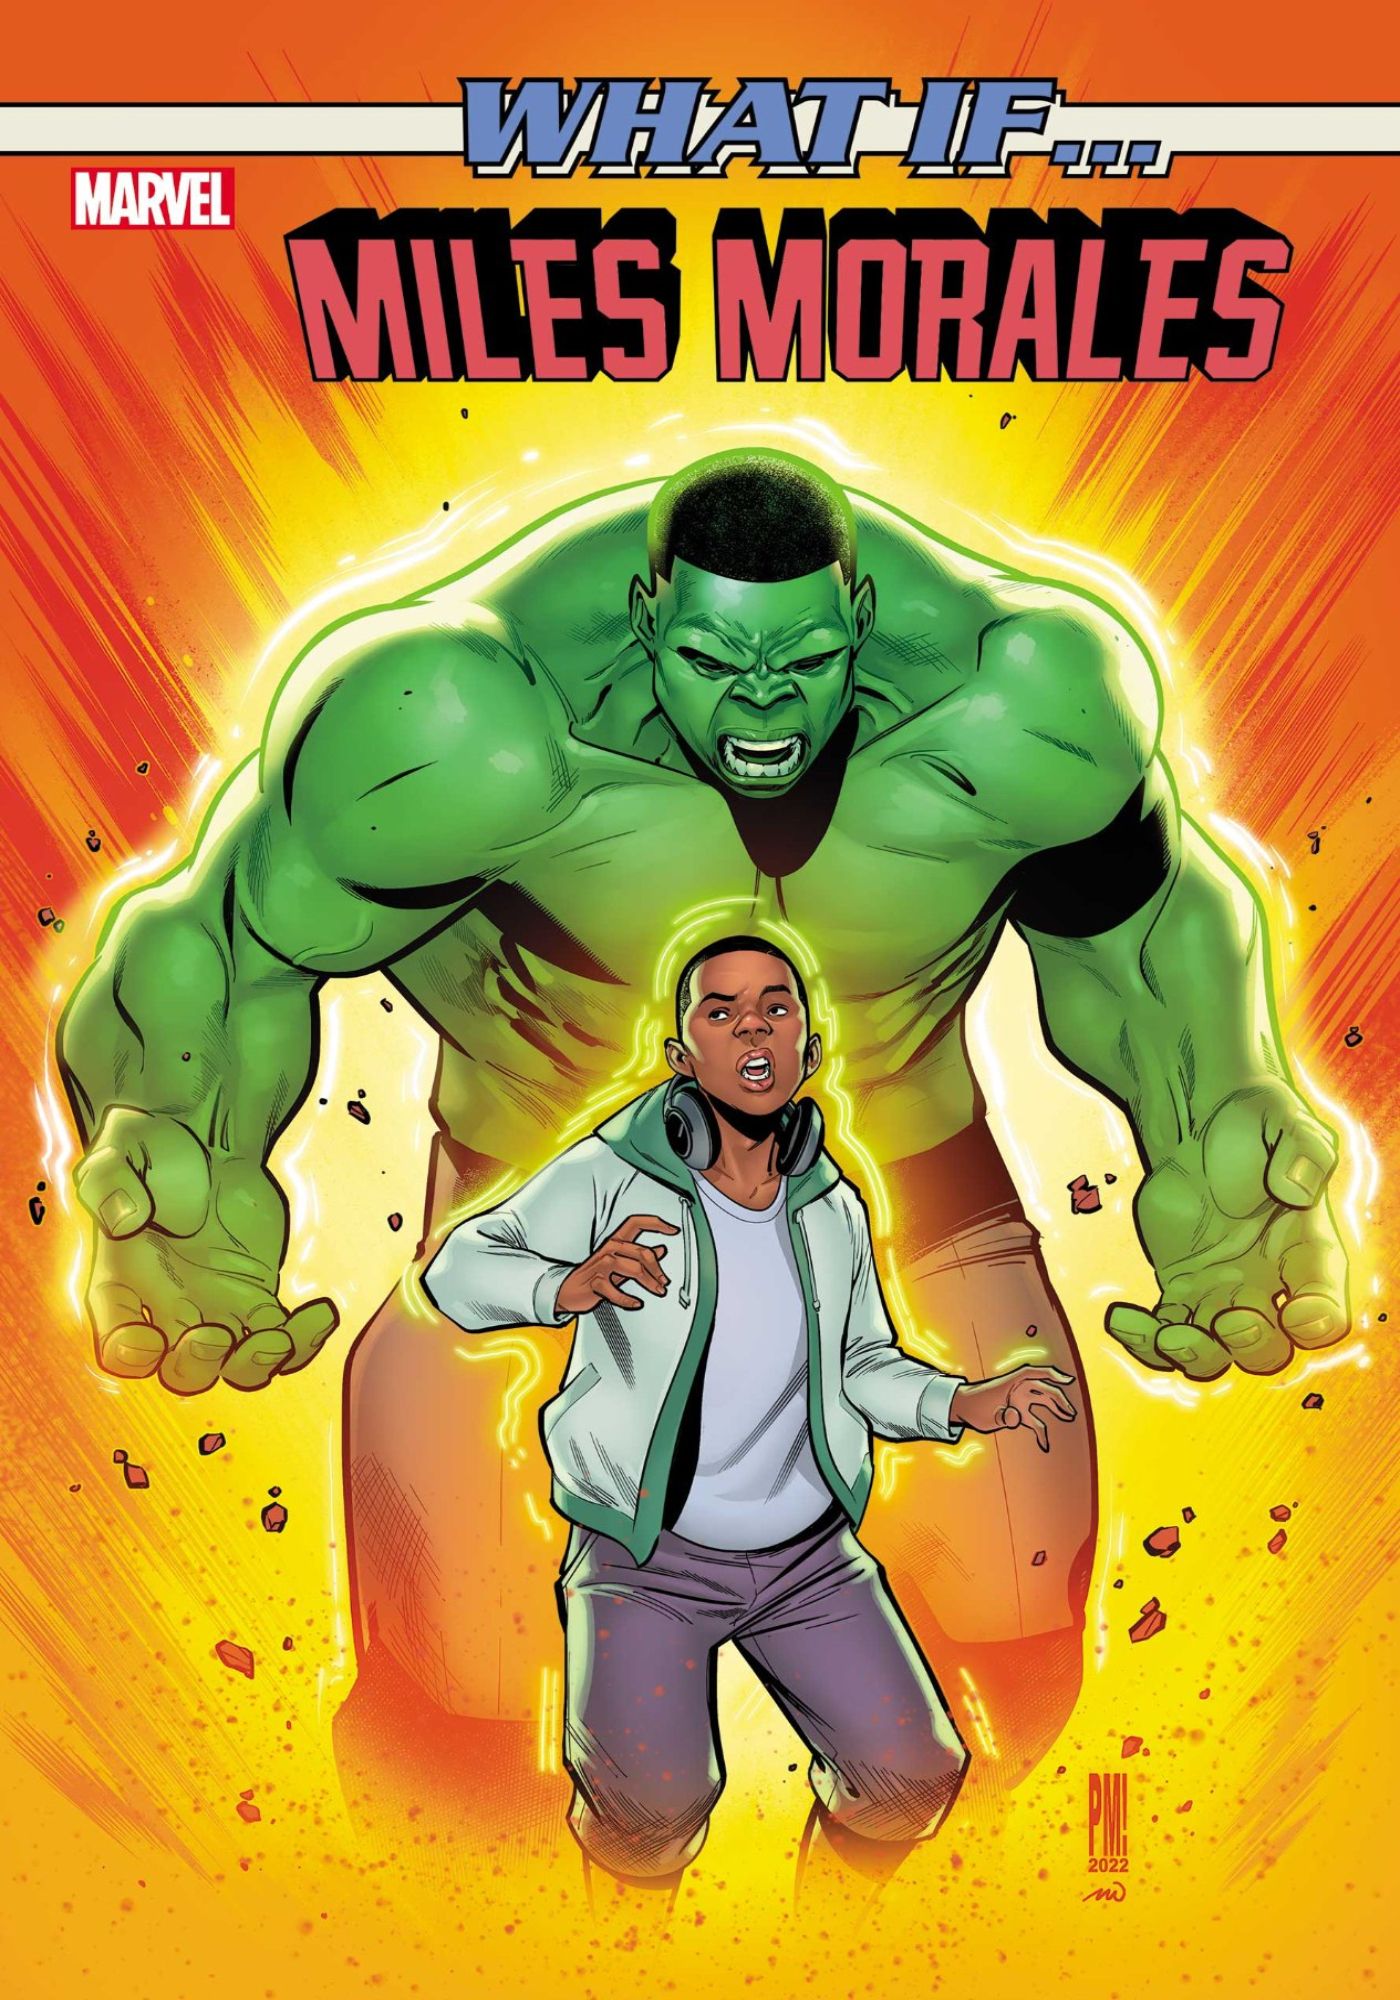 Miles Morales Is Marvel’s New Hulk With Amazing Gamma Transformation